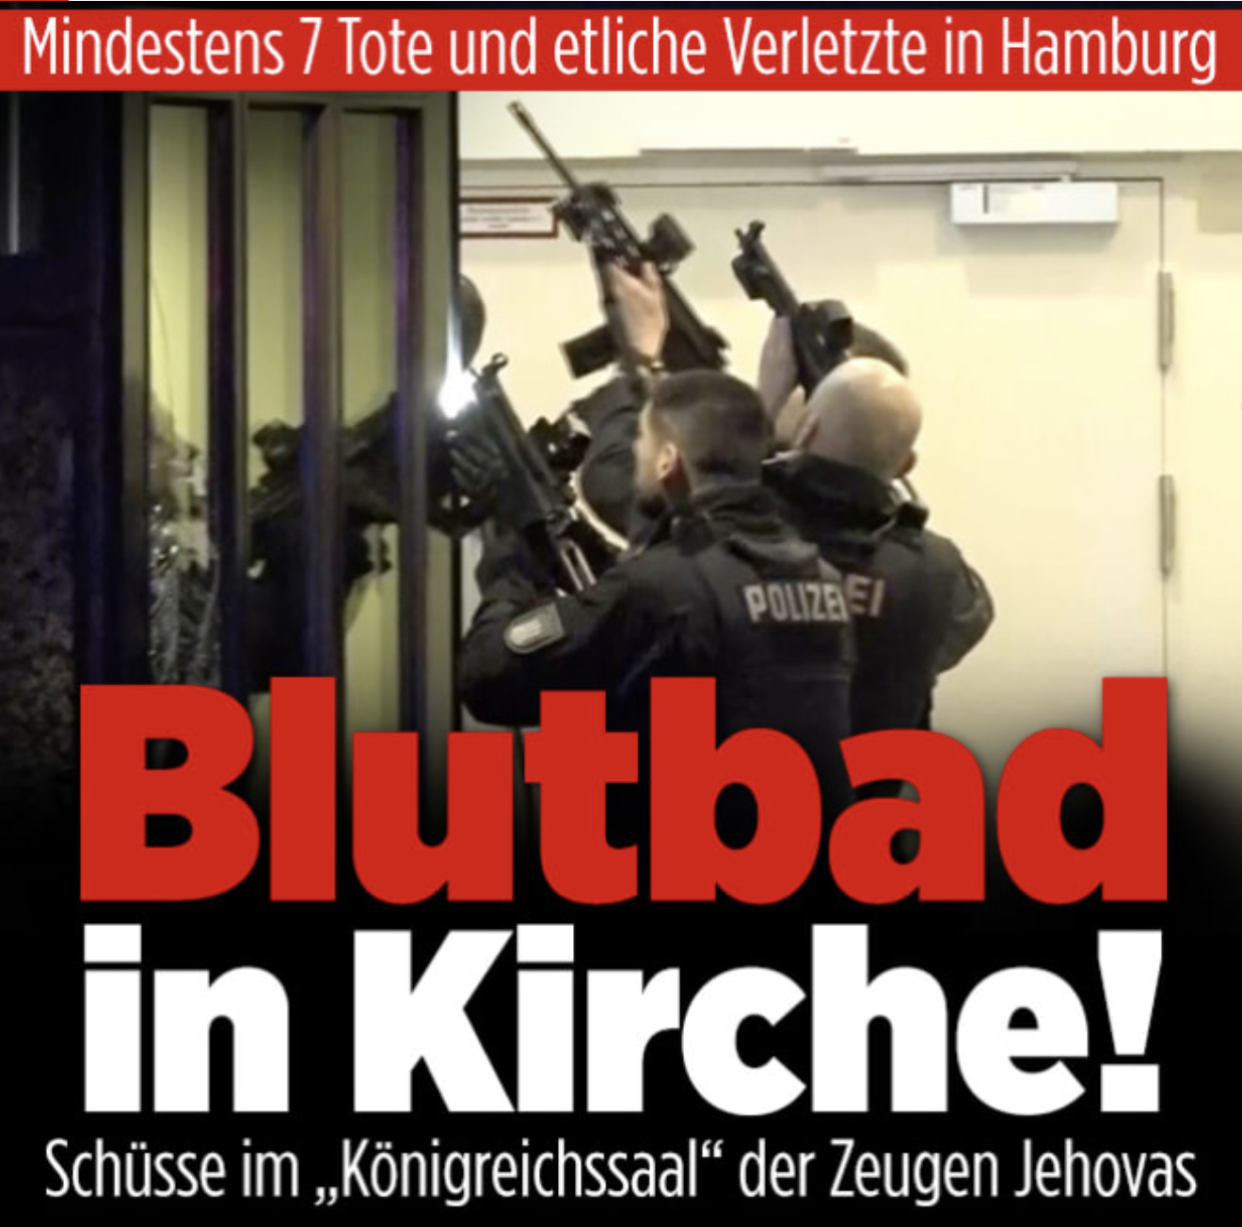 A German news headline reading ‘Bloodbath in Church!’ about a shooting on 9 March in the city of Hamburg (Bild)